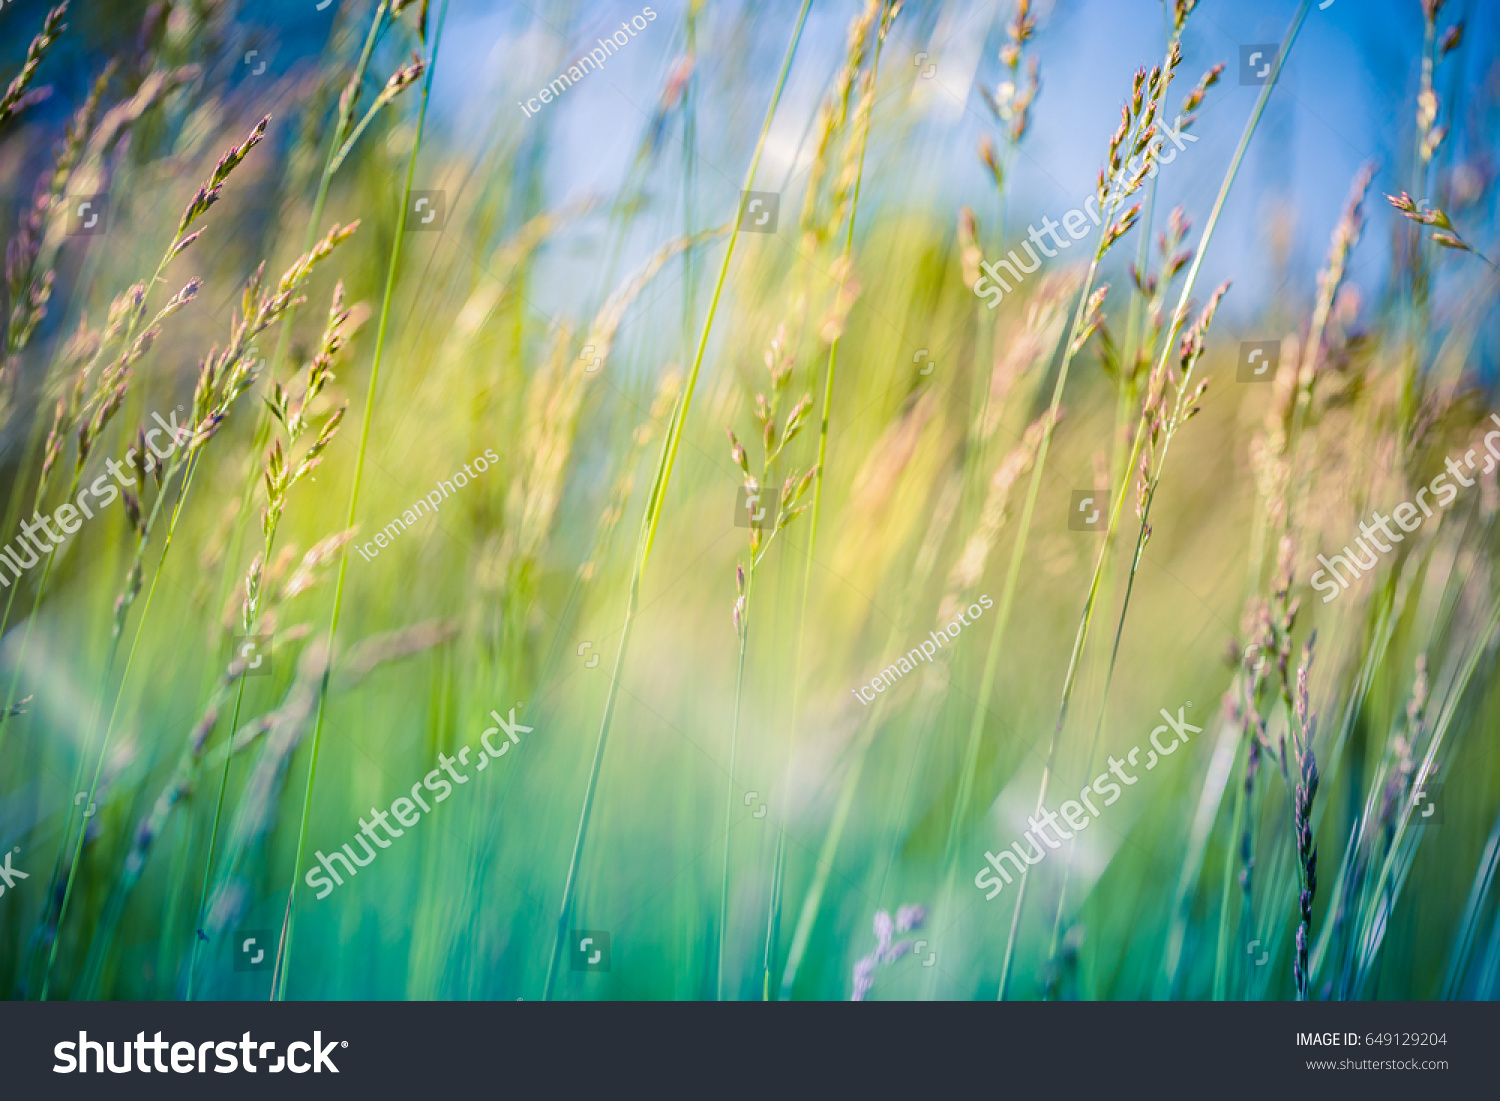 Beautiful close up ecology nature landscape with meadow. Abstract grass background. #649129204